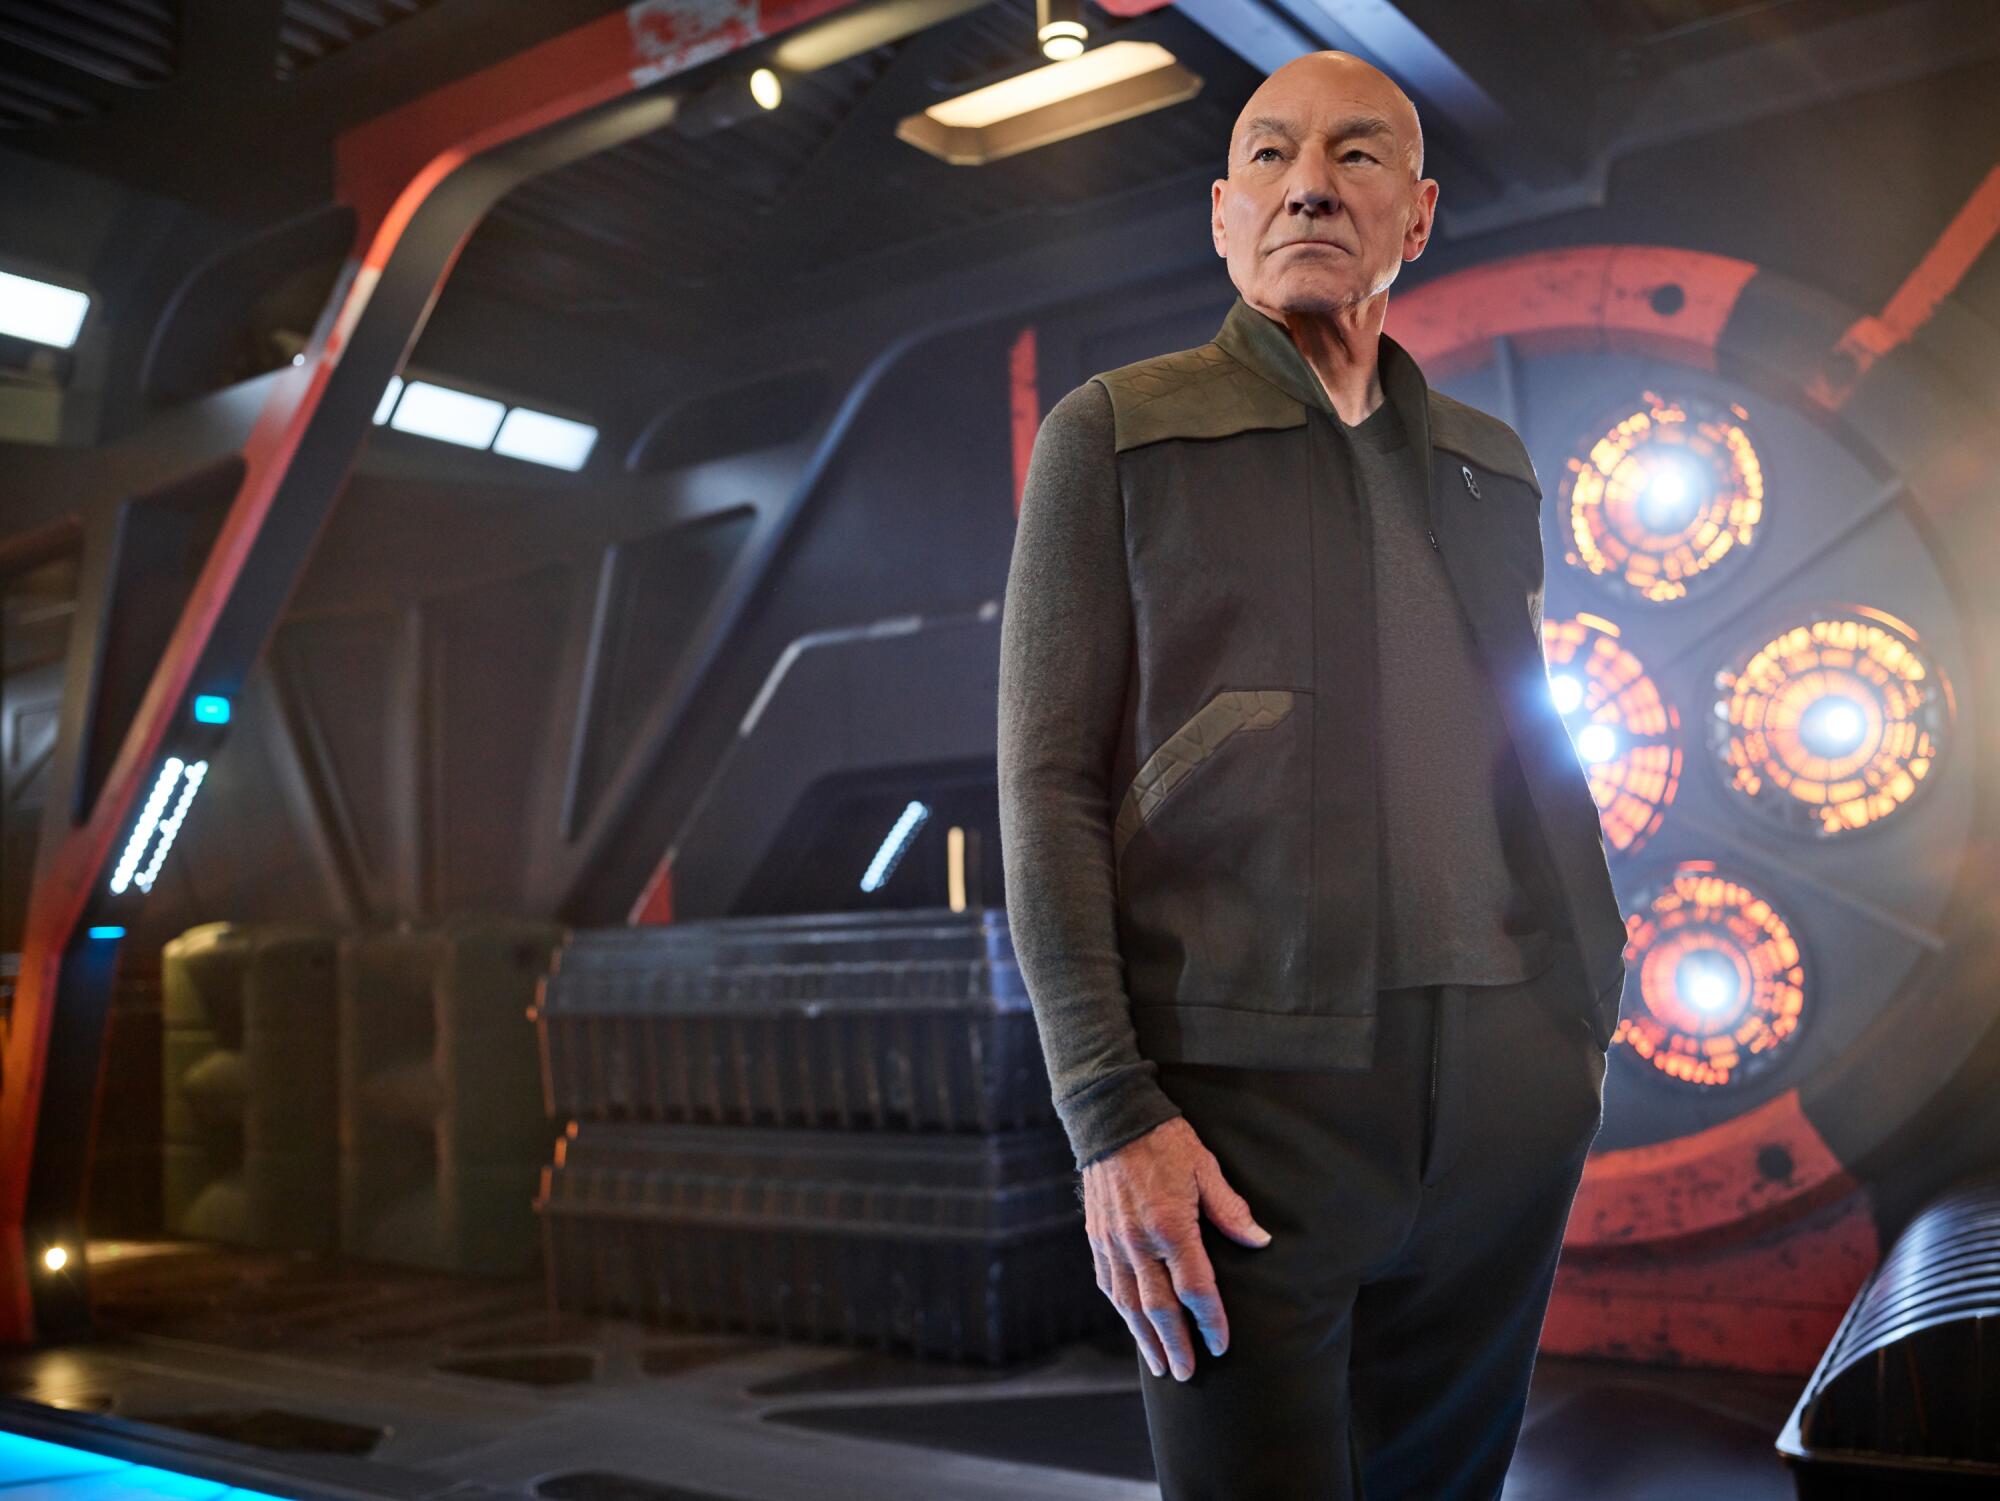 Jean-Luc Picard in dark clothing on a starship.